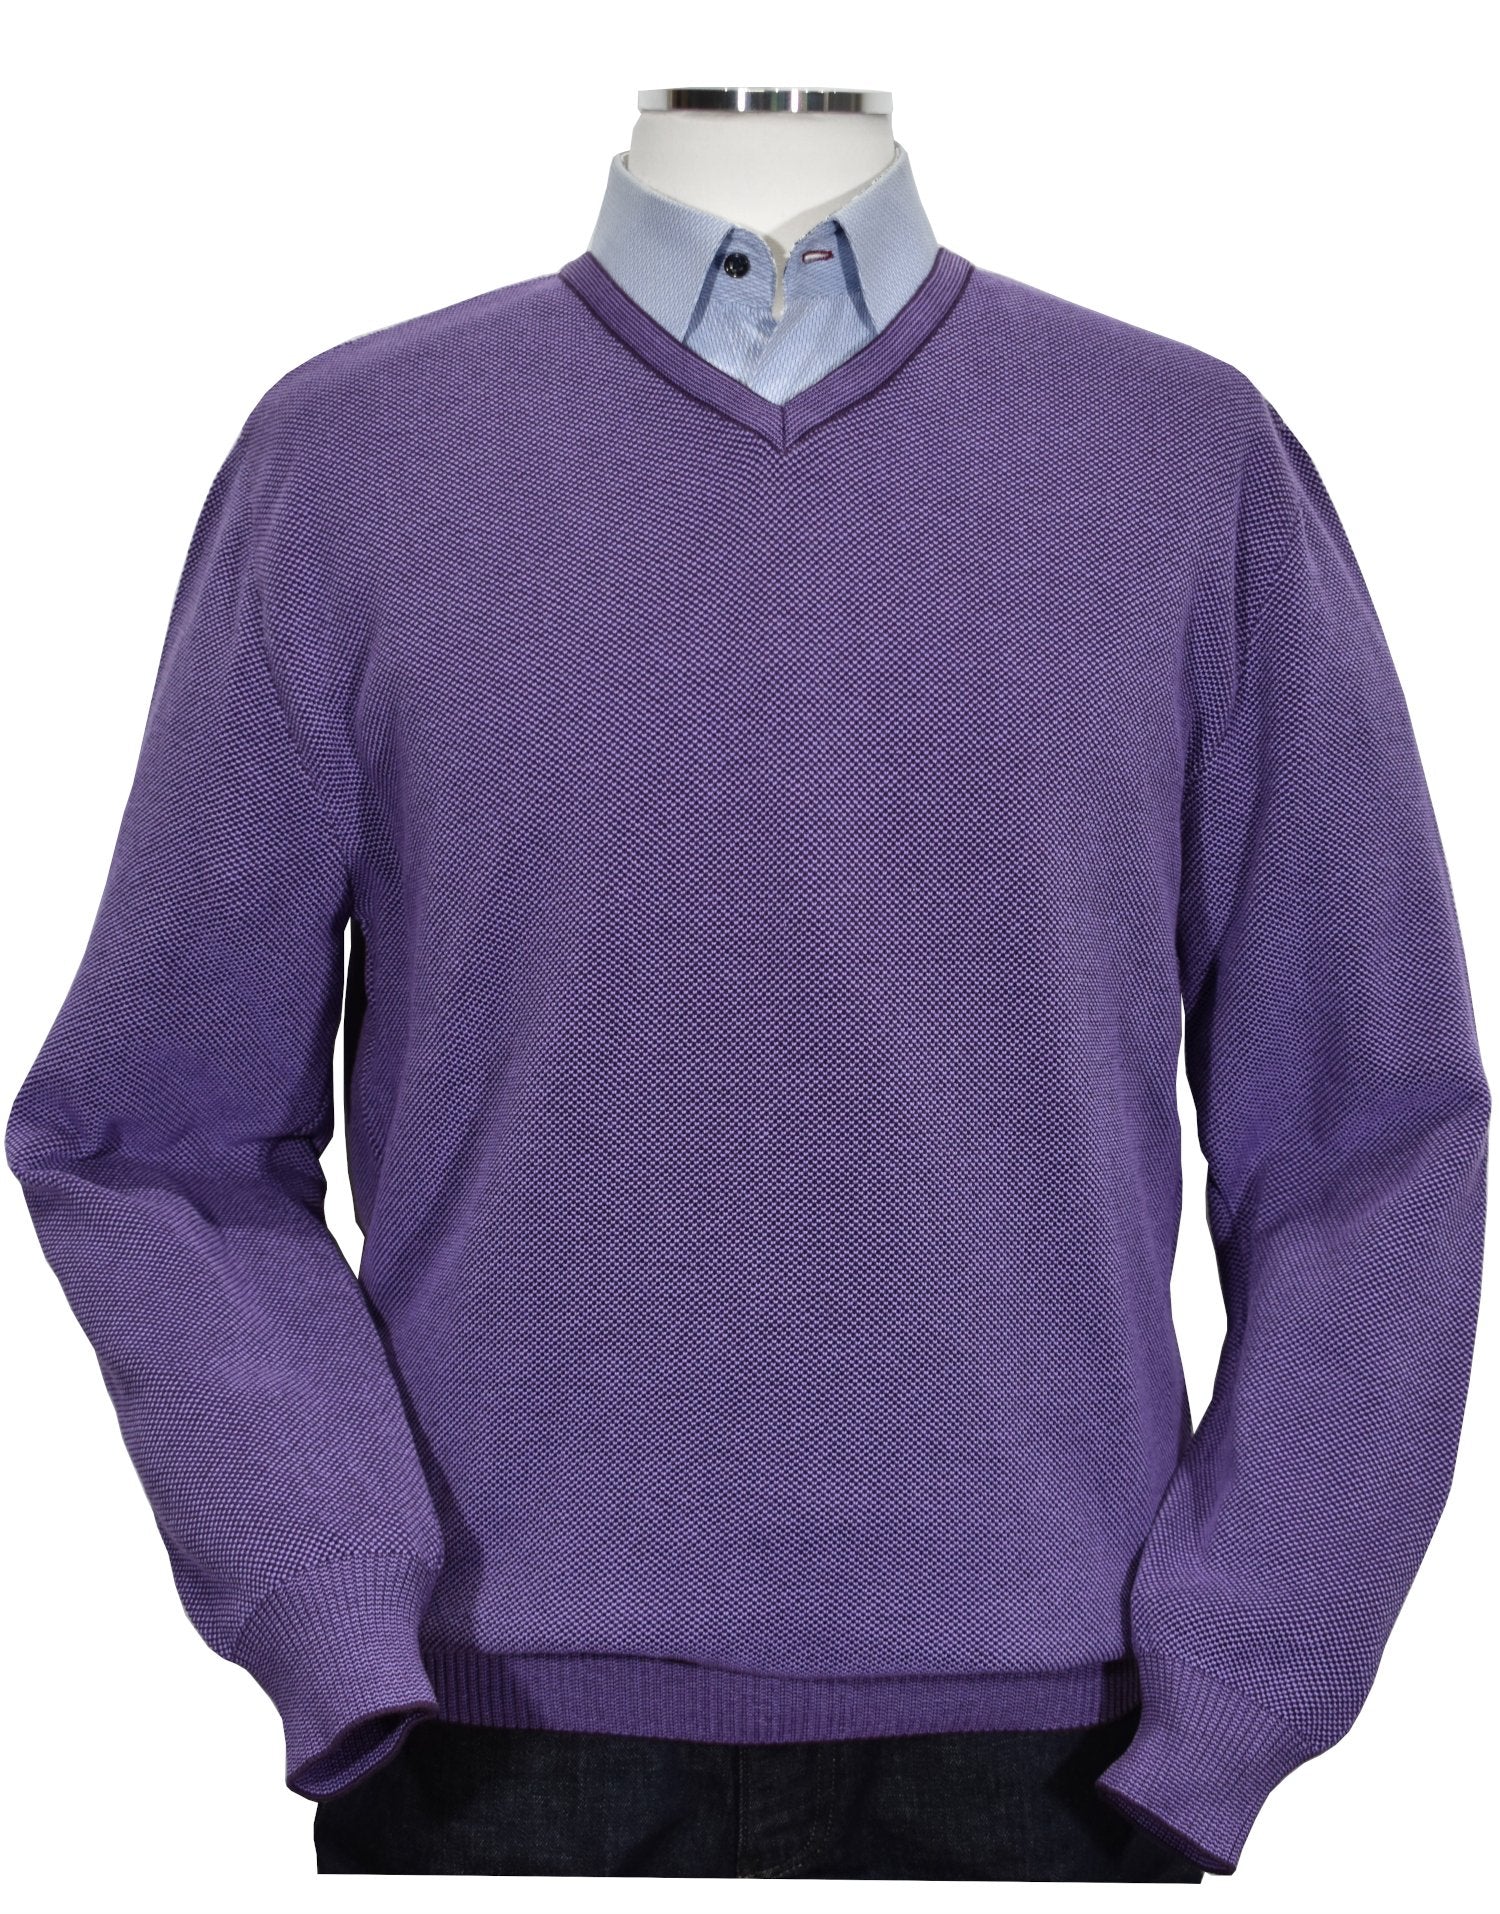 For something timeless and classic, look no further than our signature v-neck light layer, made from ultra-soft Italian cotton with a two-color mixed yarn look for added depth. A perfect complement for cool days, boasting classic banded cuffs and a waist band as well as a comfortable fit.   Italian Popcorn Stitch Sweater by Marcello.